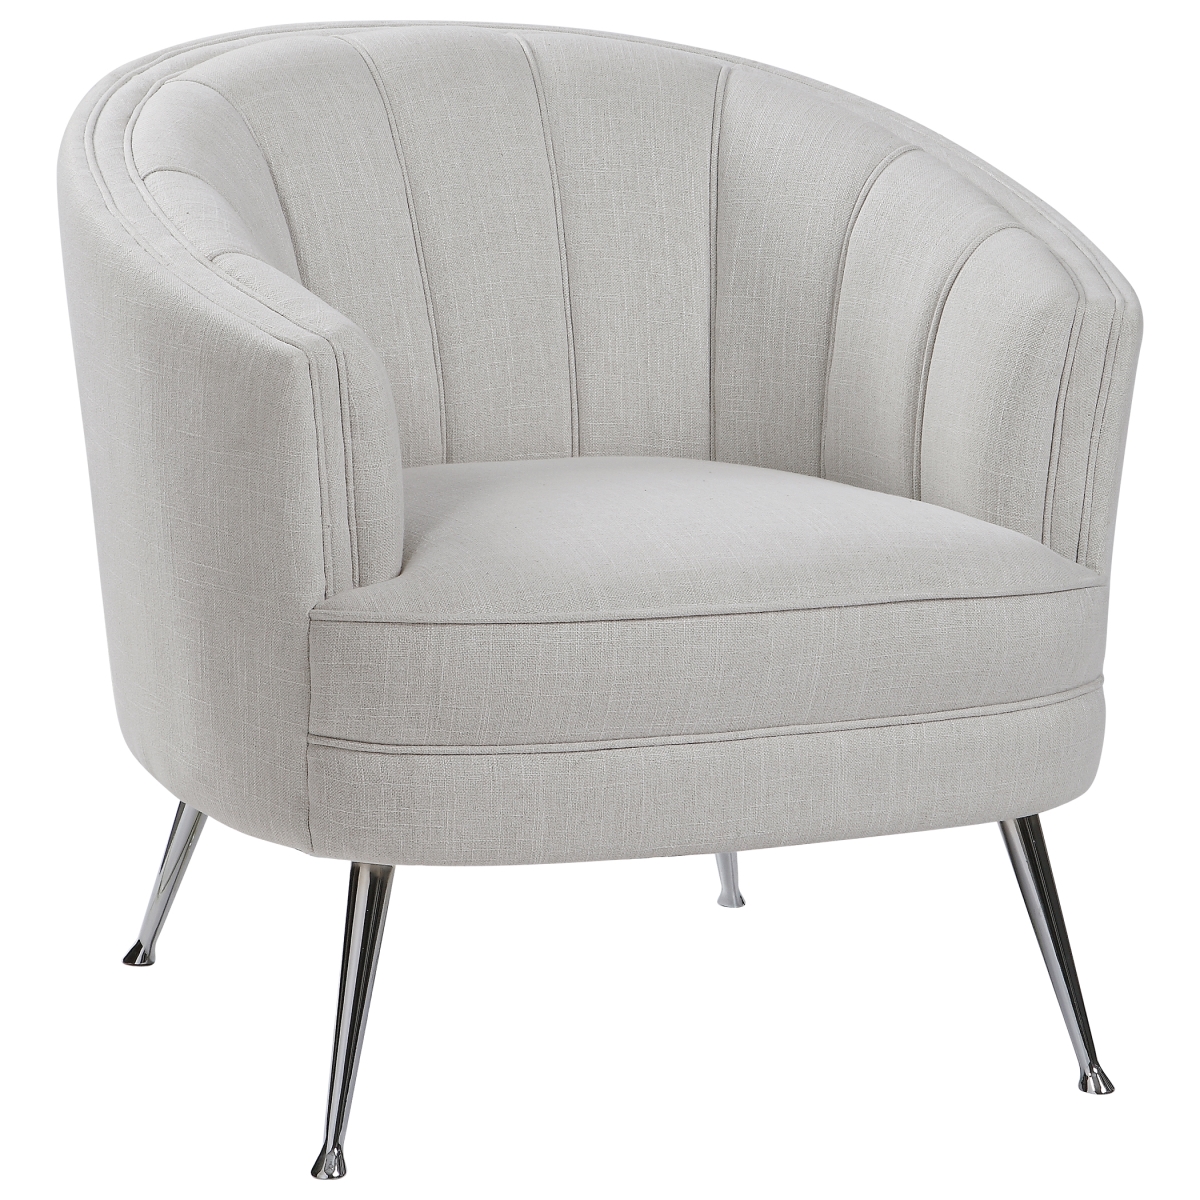 Picture of 212 Main 23510 Janie Mid-Century Accent Chair - 33 x 33 x 31 in.